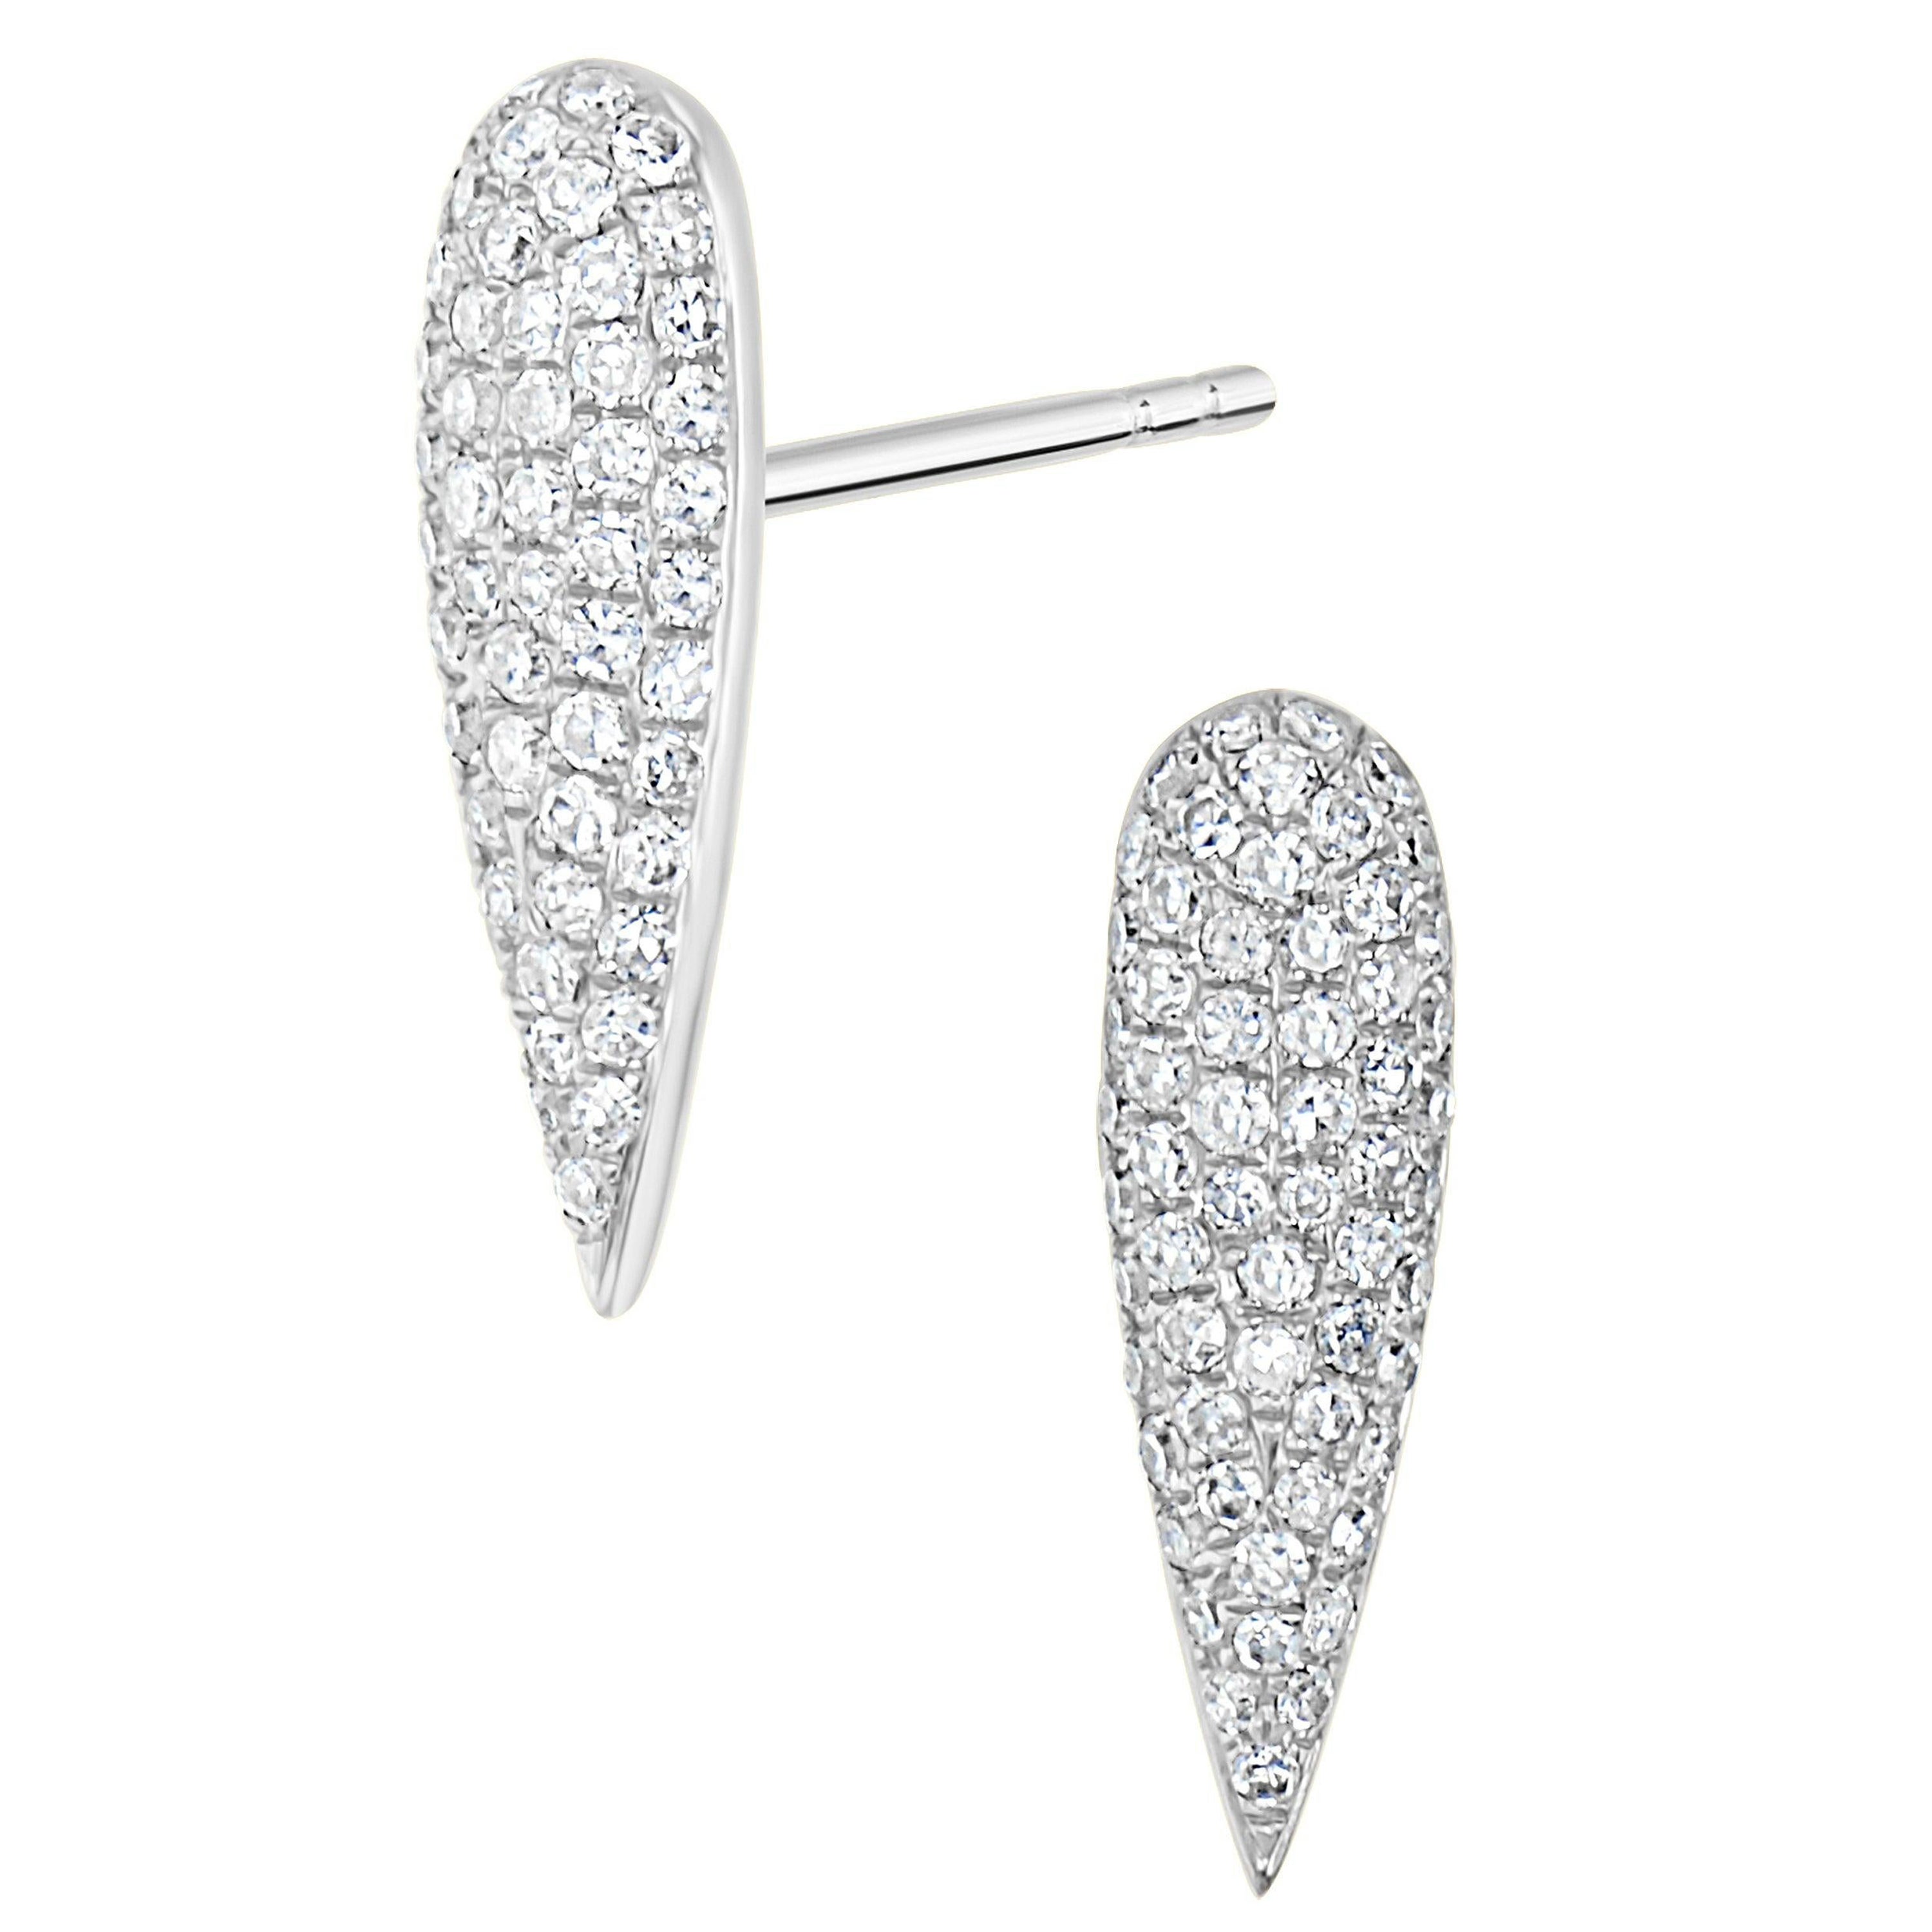 Luxle Pave Diamond Pear Stud Earrings in 14k White Gold For Sale